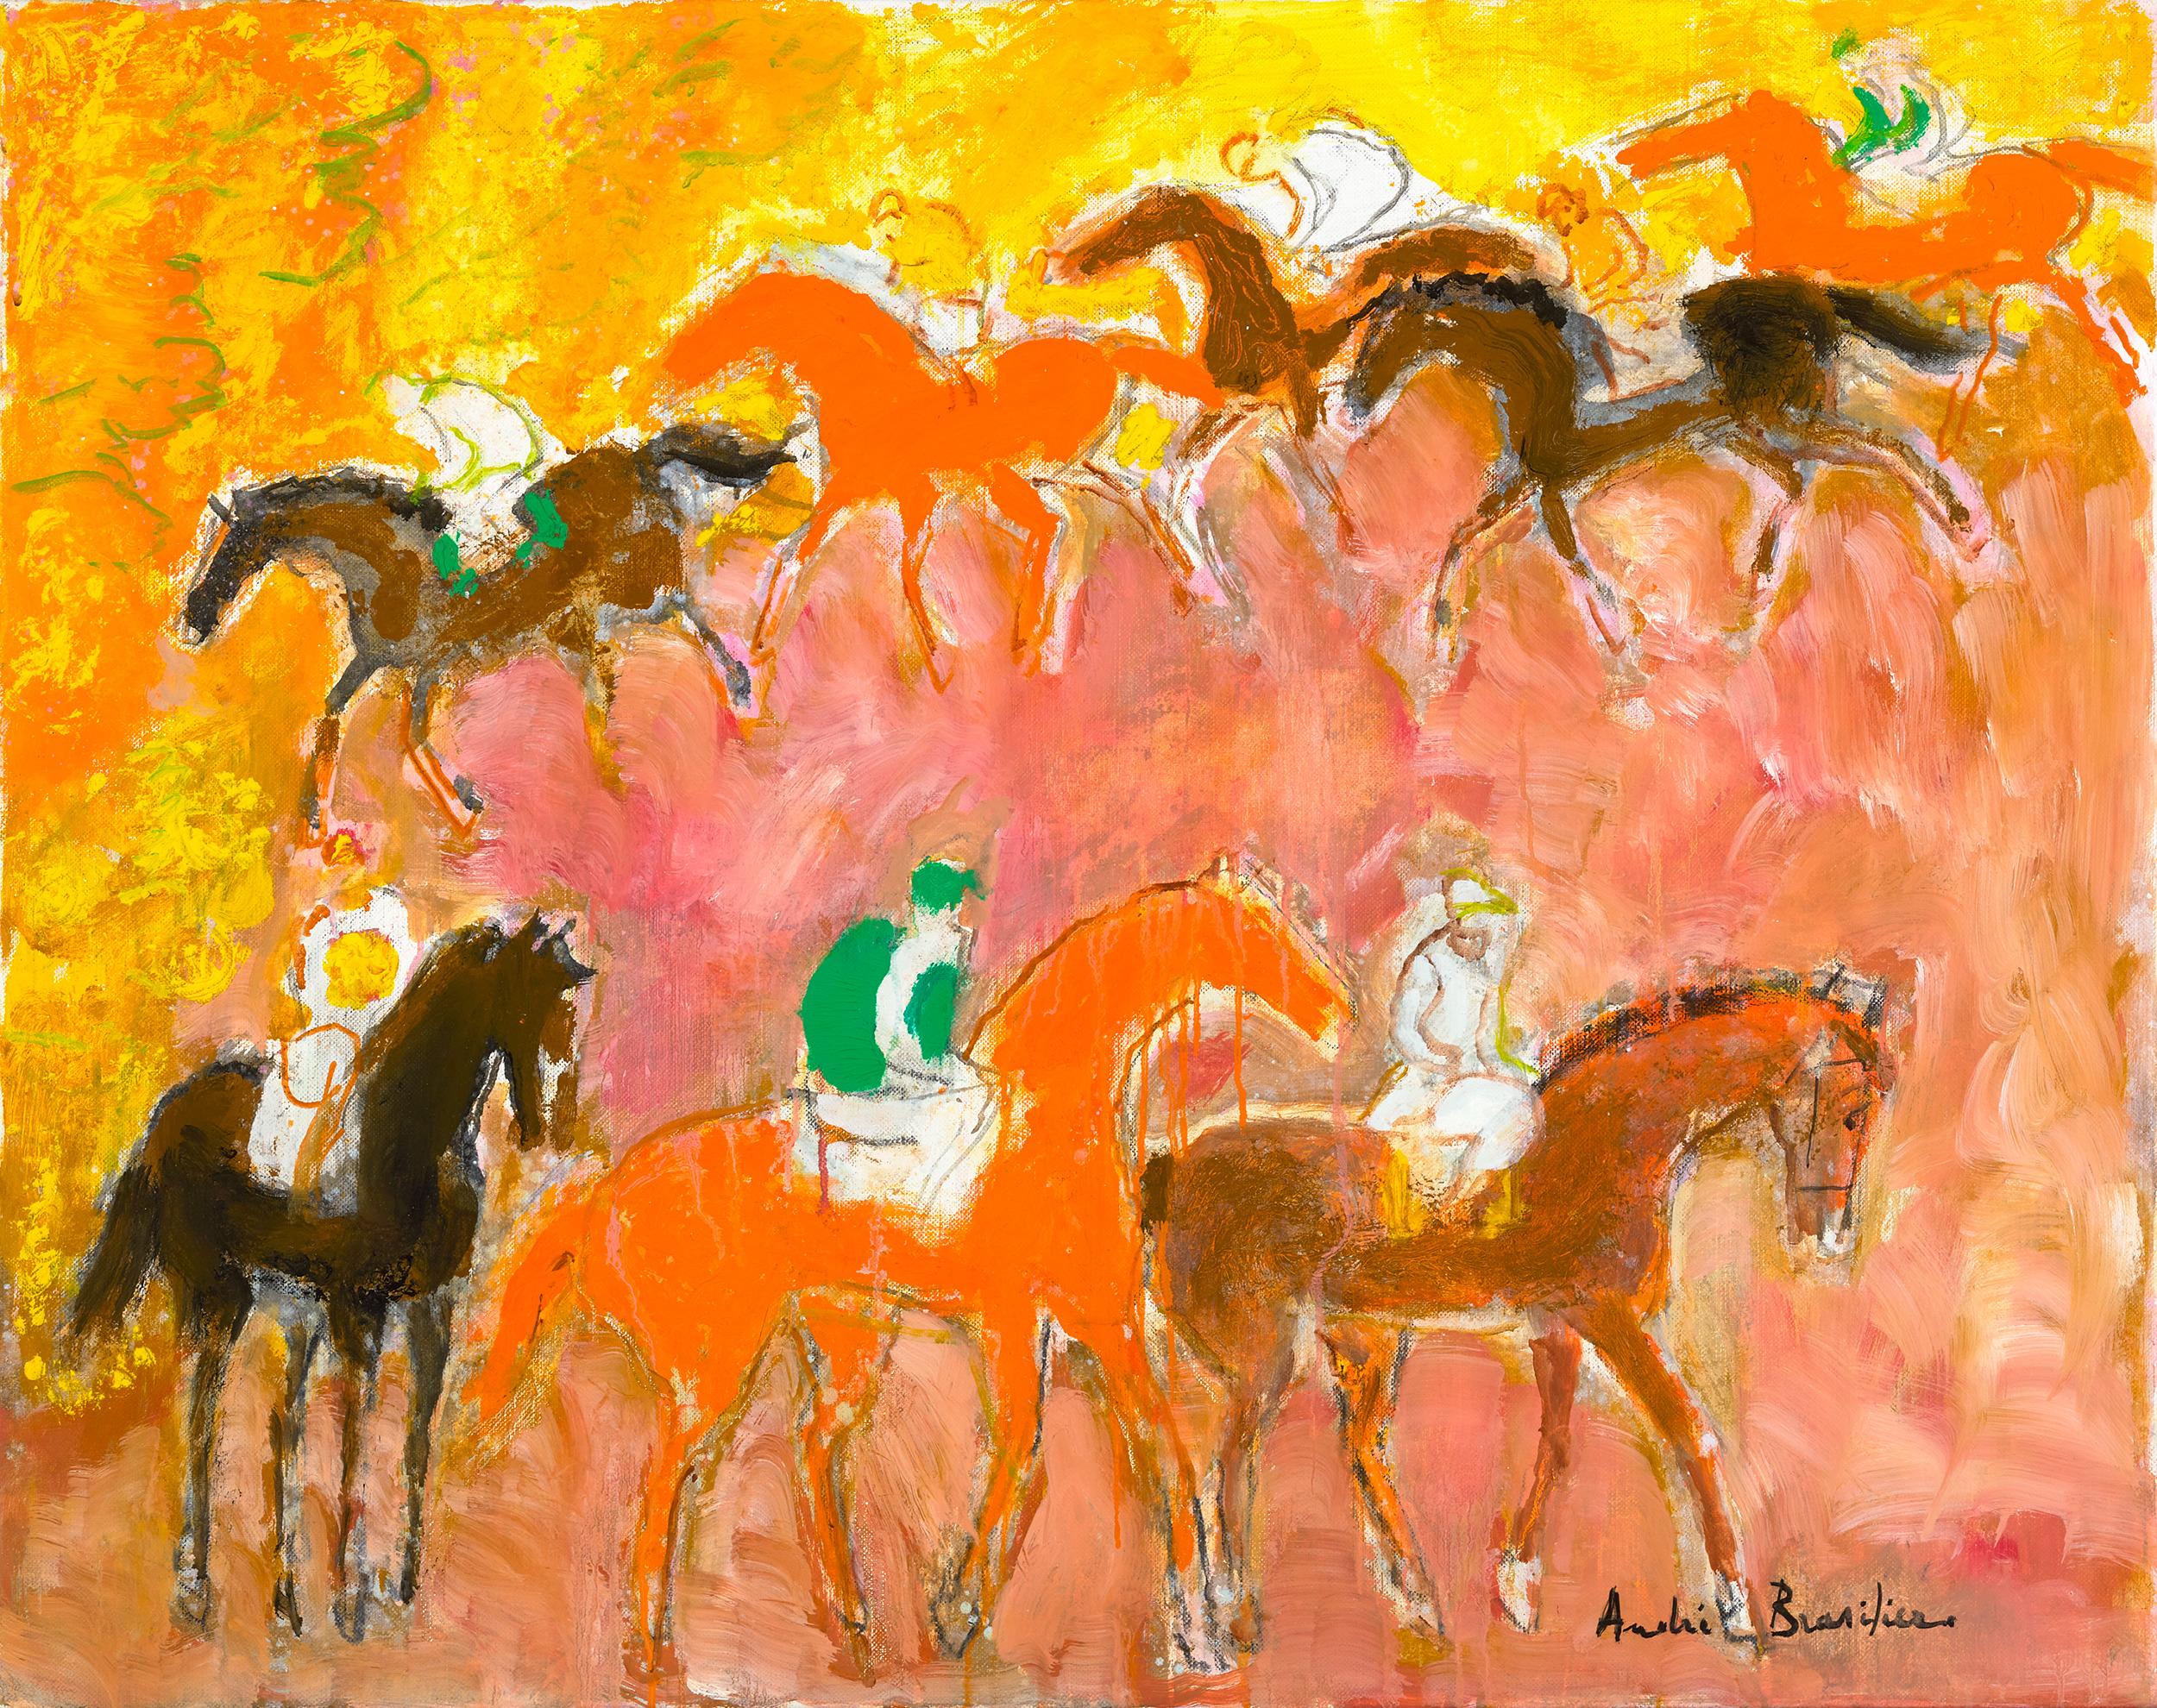 André Brasilier
b. 1929  French

Les chevaux de feu
(The Fire Horses)

Signed “André Brasilier” (lower right)
Oil on canvas

Combining abstract expressionist elements with dynamic brushwork and pulsating color, this compelling oil on canvas is the